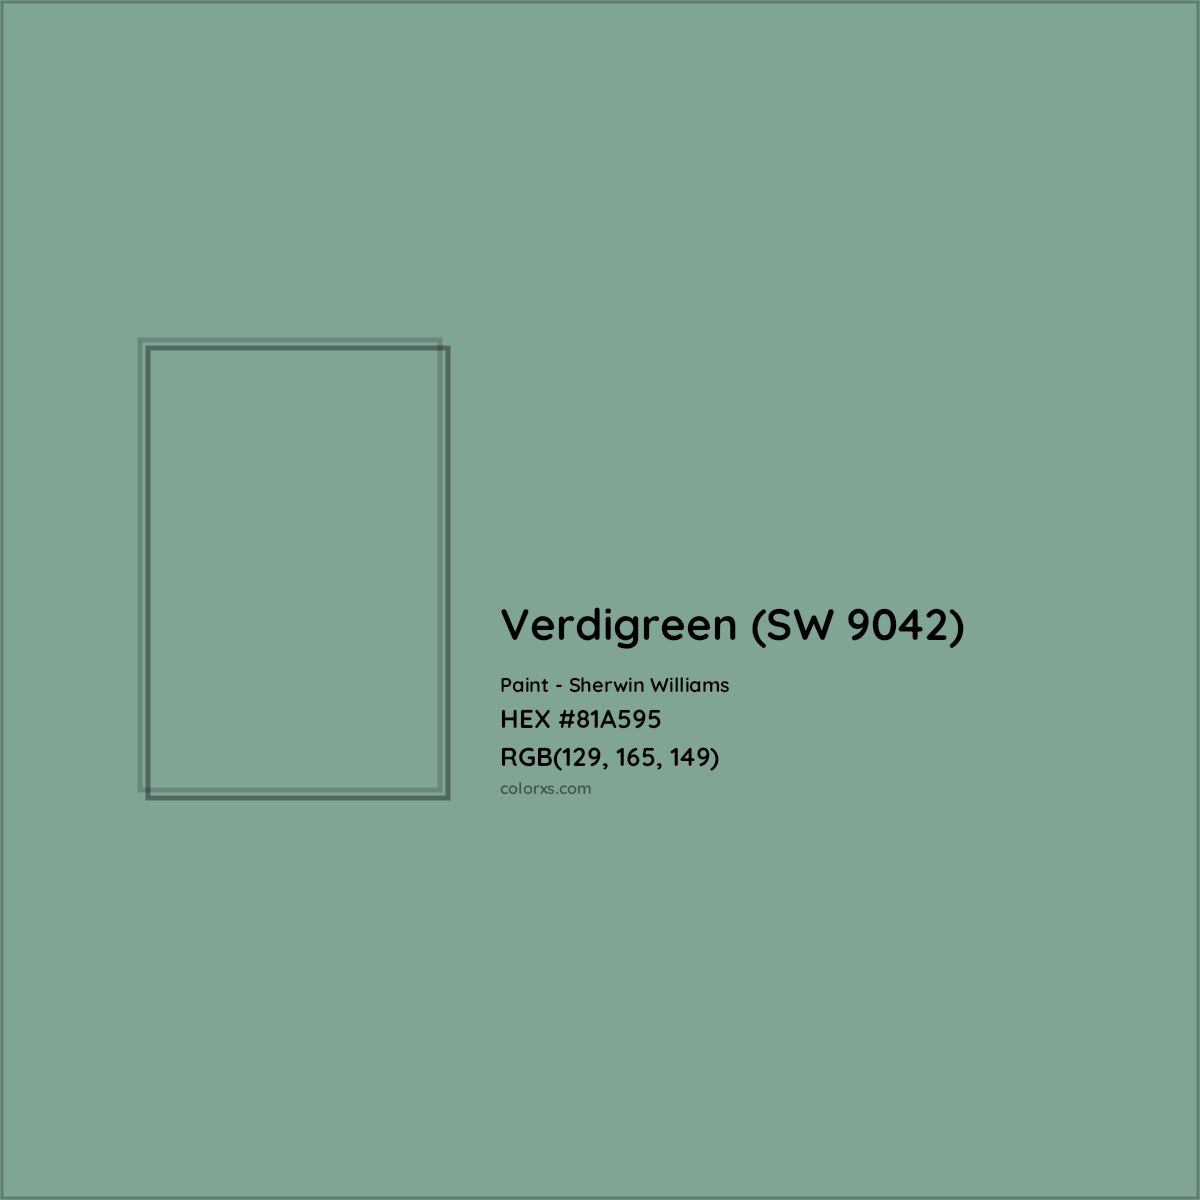 HEX #81A595 Verdigreen (SW 9042) Paint Sherwin Williams - Color Code